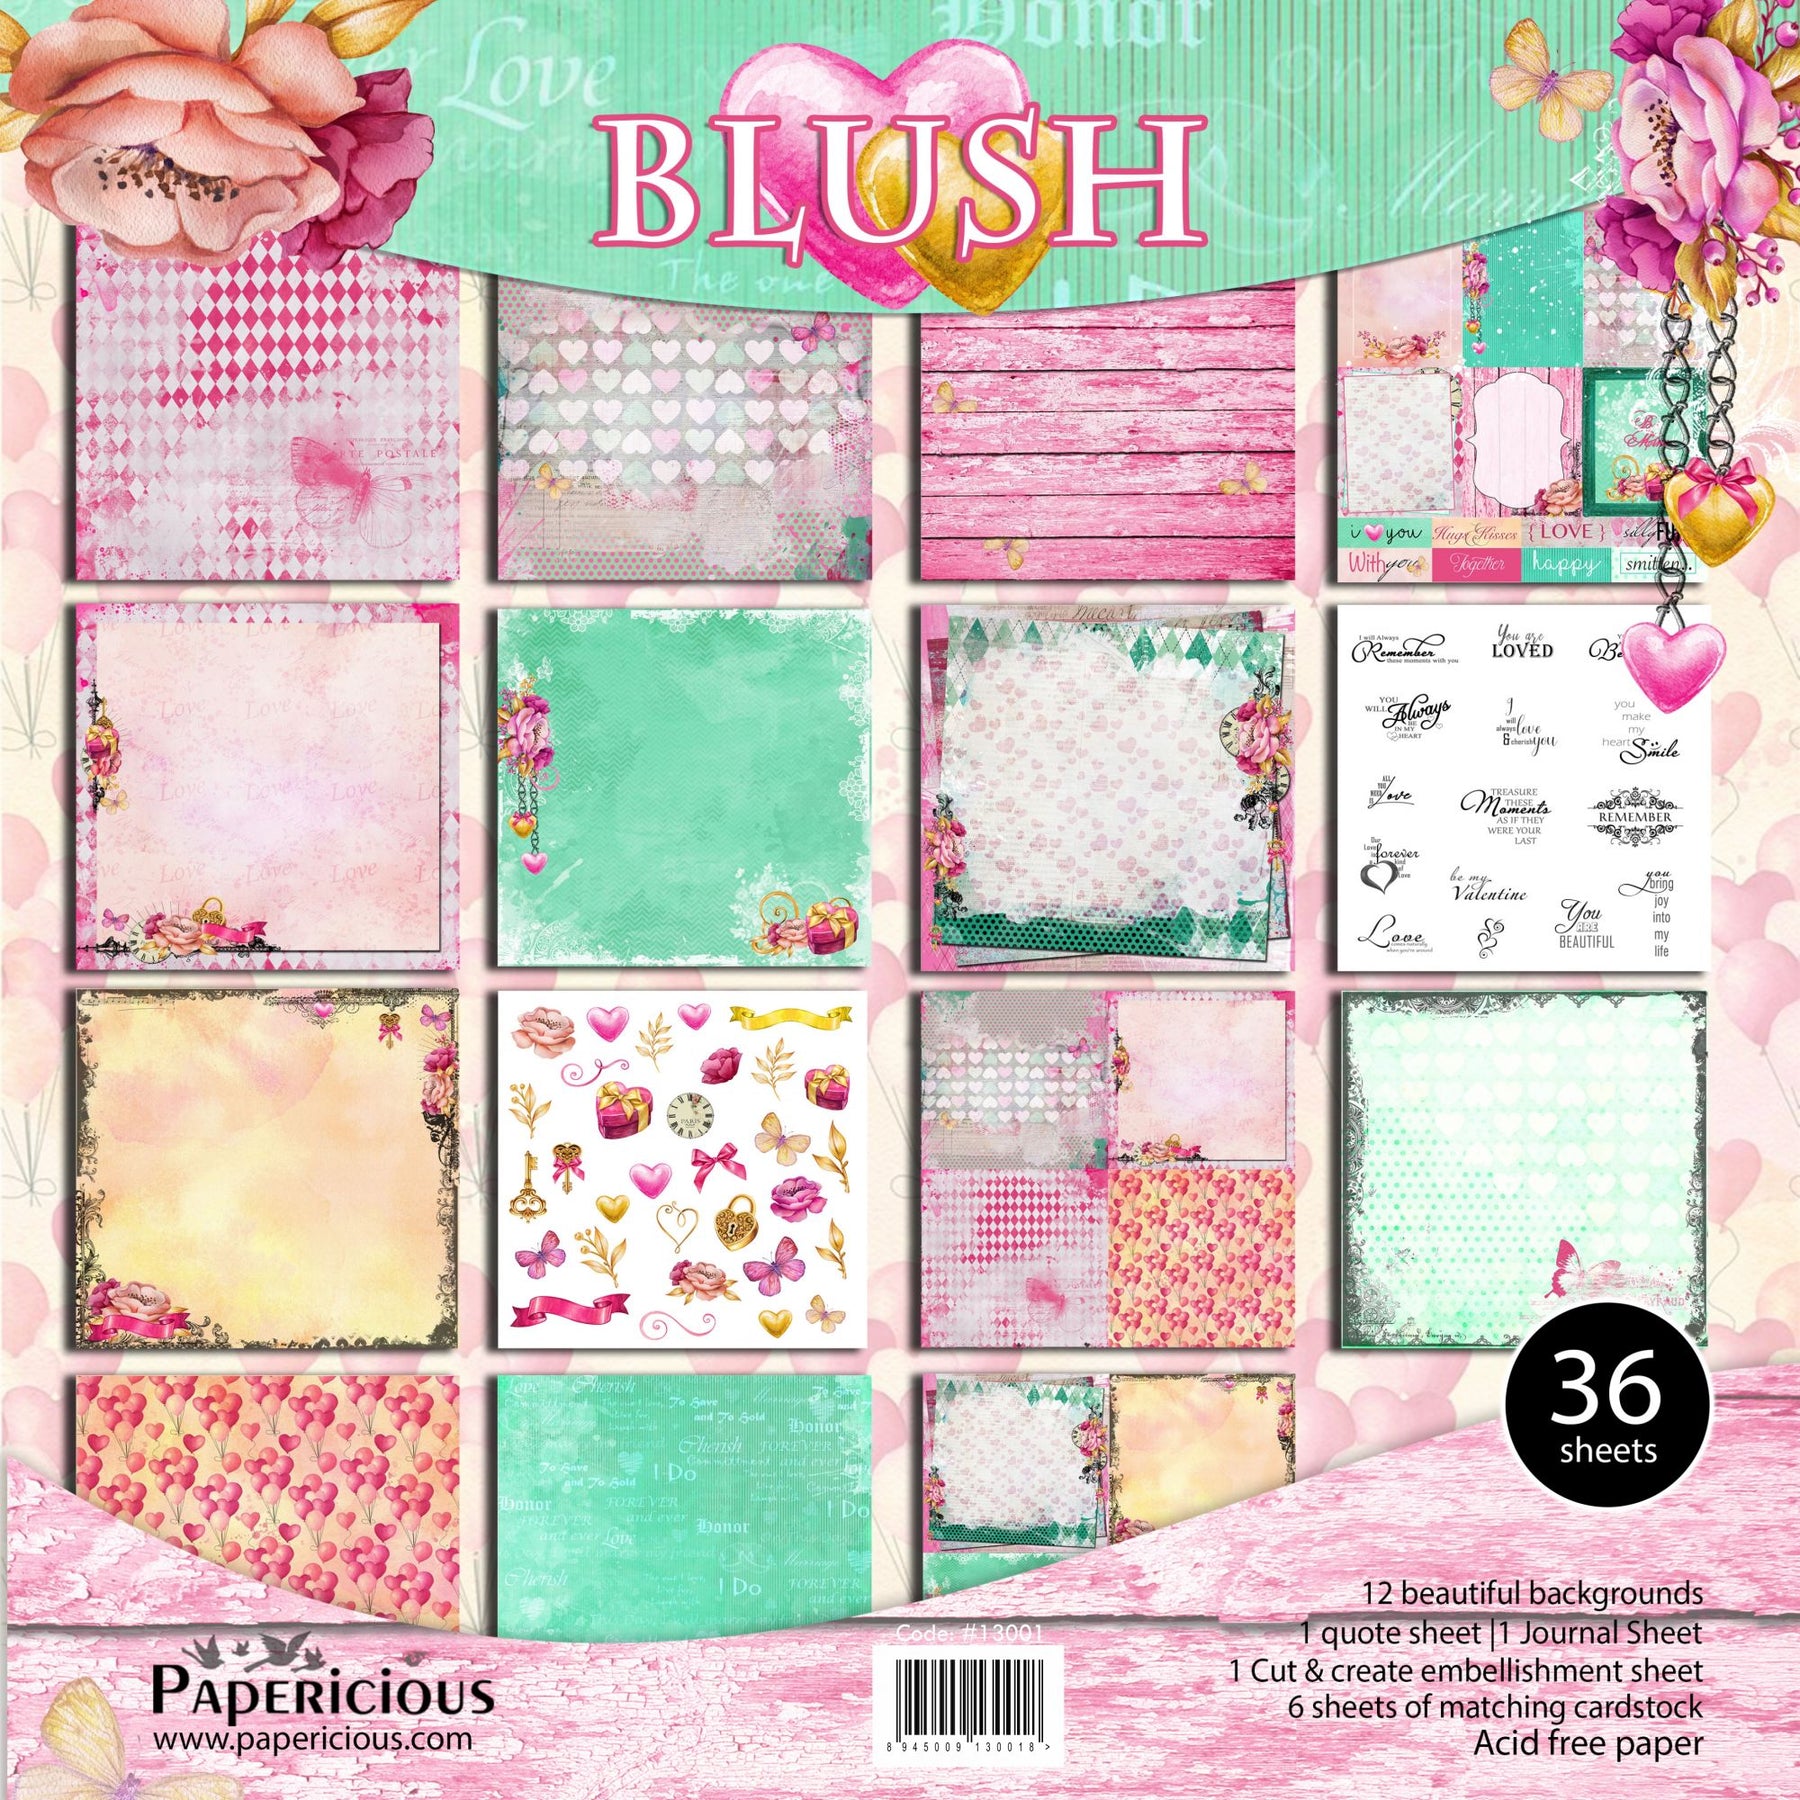 PAPERICIOUS - Blush - Designer Pattern Printed Scrapbook Papers 12x12 inch / 36 sheets